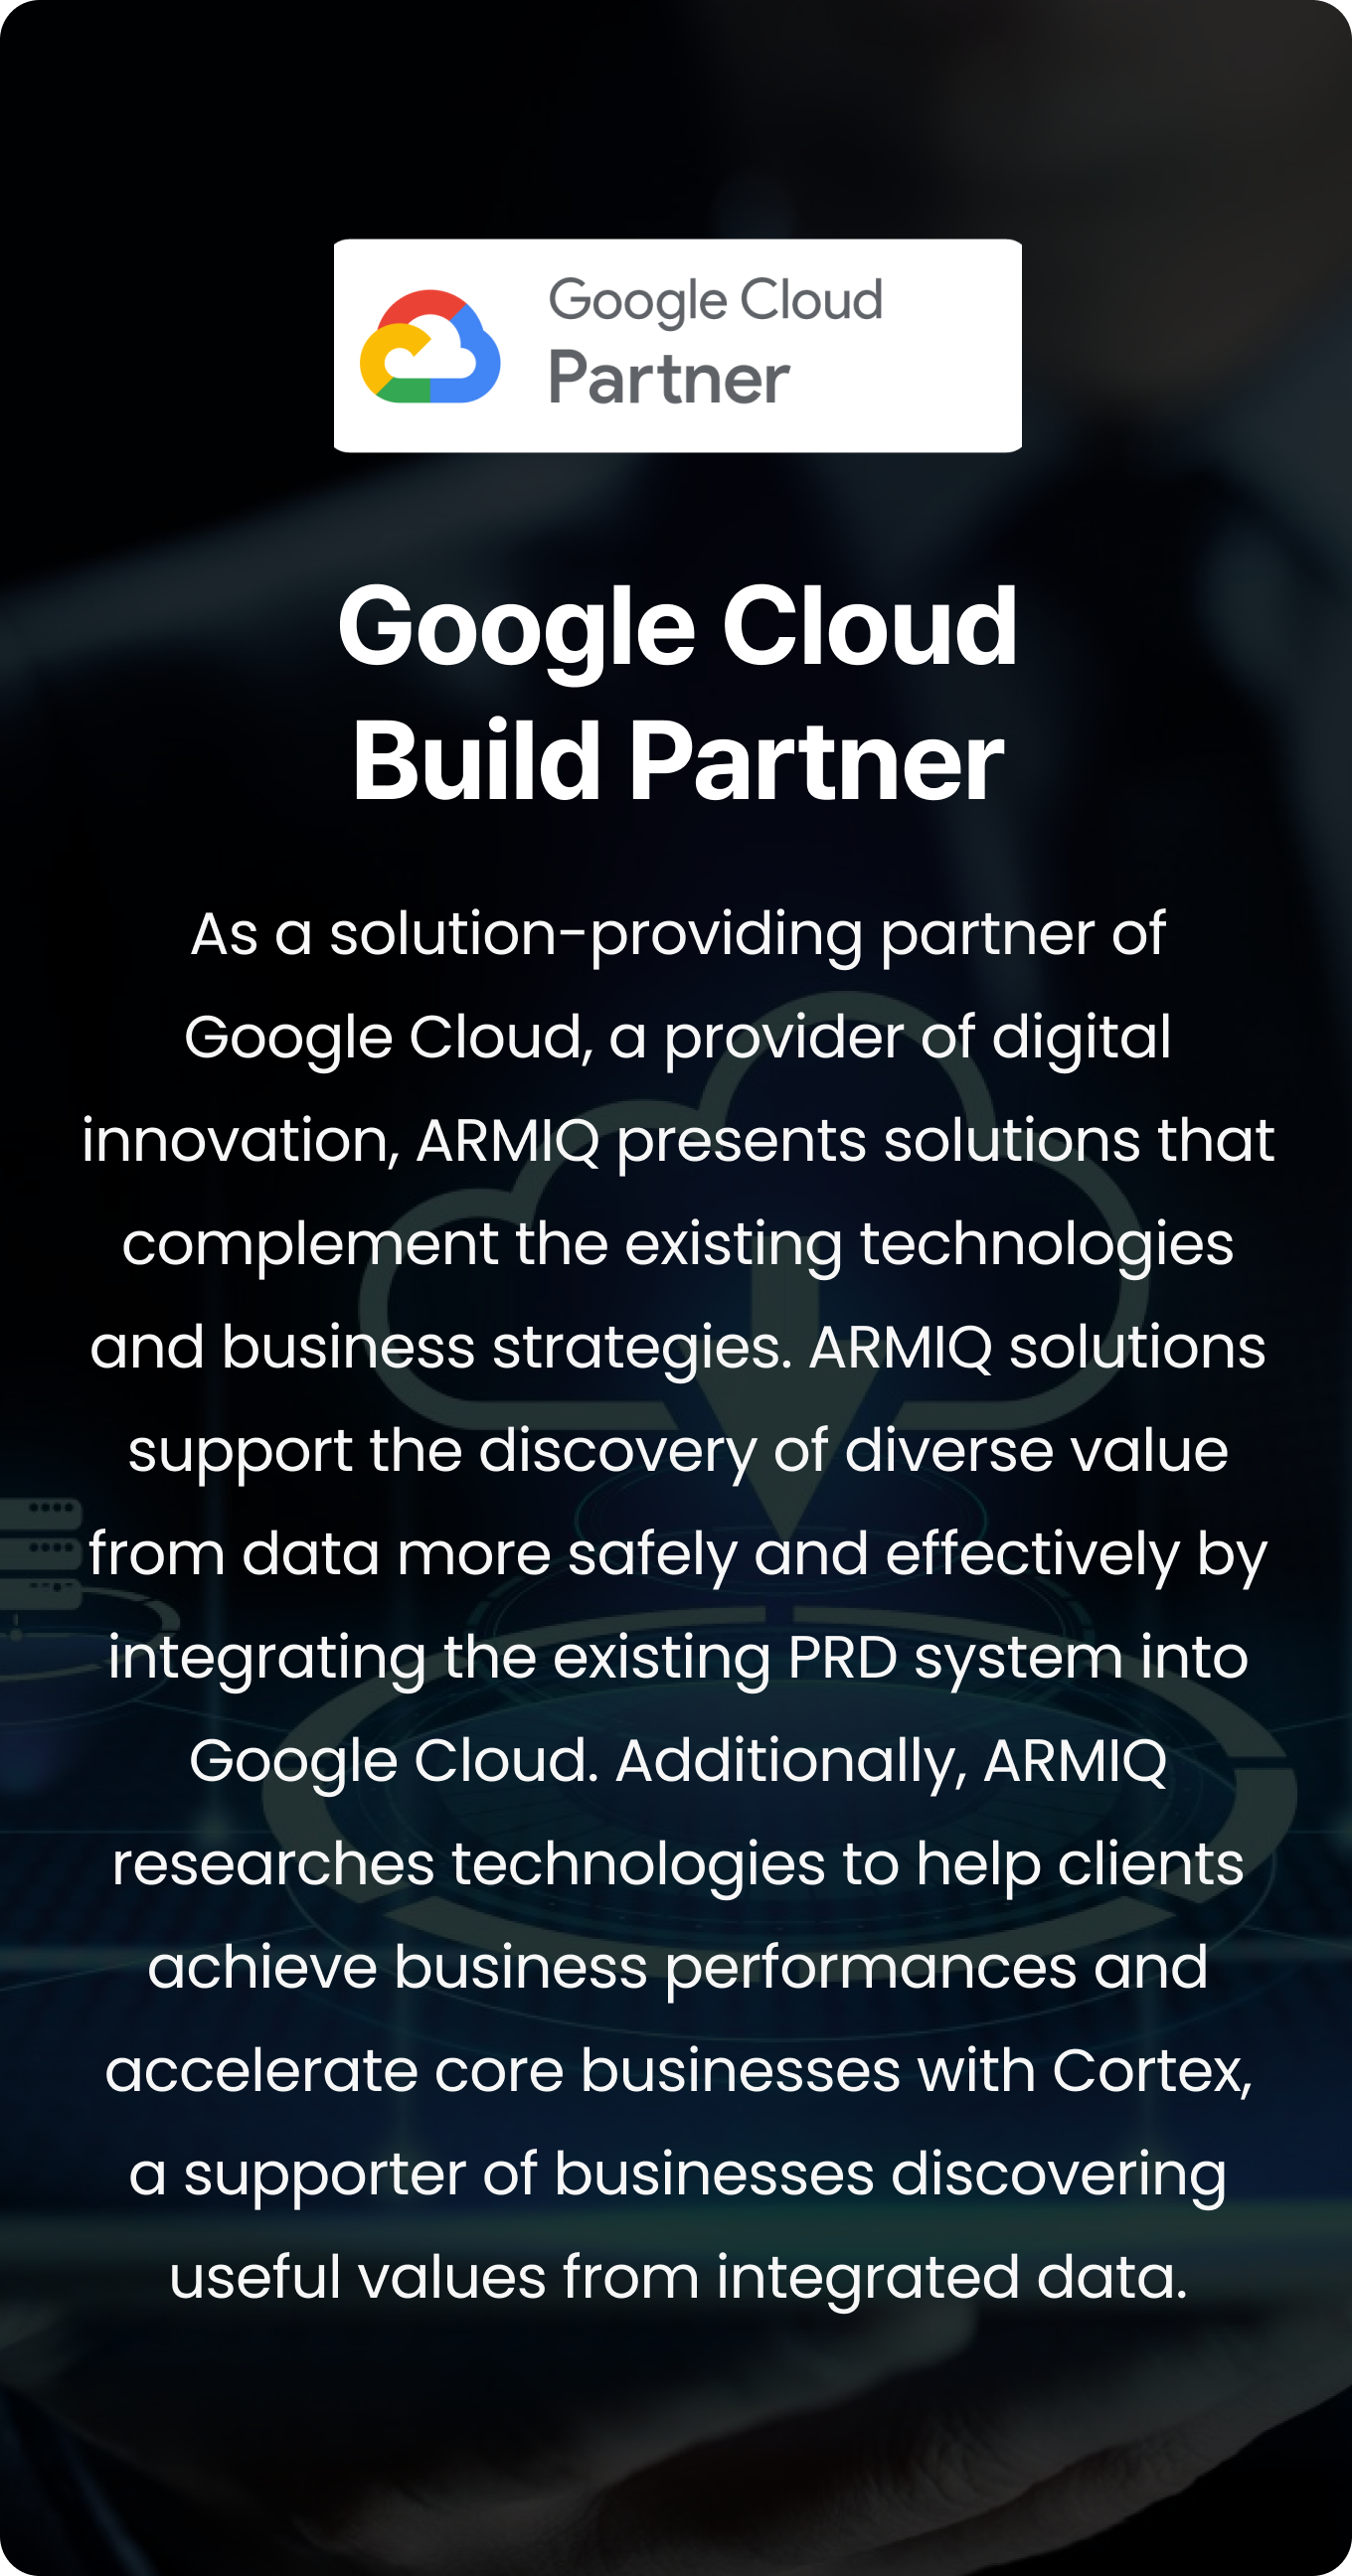 As a solution-providing partner of Google Cloud, a provider of digital innovation, ARMIQ presents solutions that complement the existing technologies and business strategies. ARMIQ solutions support the discovery of diverse value from data more safely and effectively by integrating the existing PRD system into Google Cloud. Additionally, ARMIQ researches technologies to help clients achieve business performances and accelerate core businesses with Cortex, a supporter of businesses discovering useful values from integrated data.